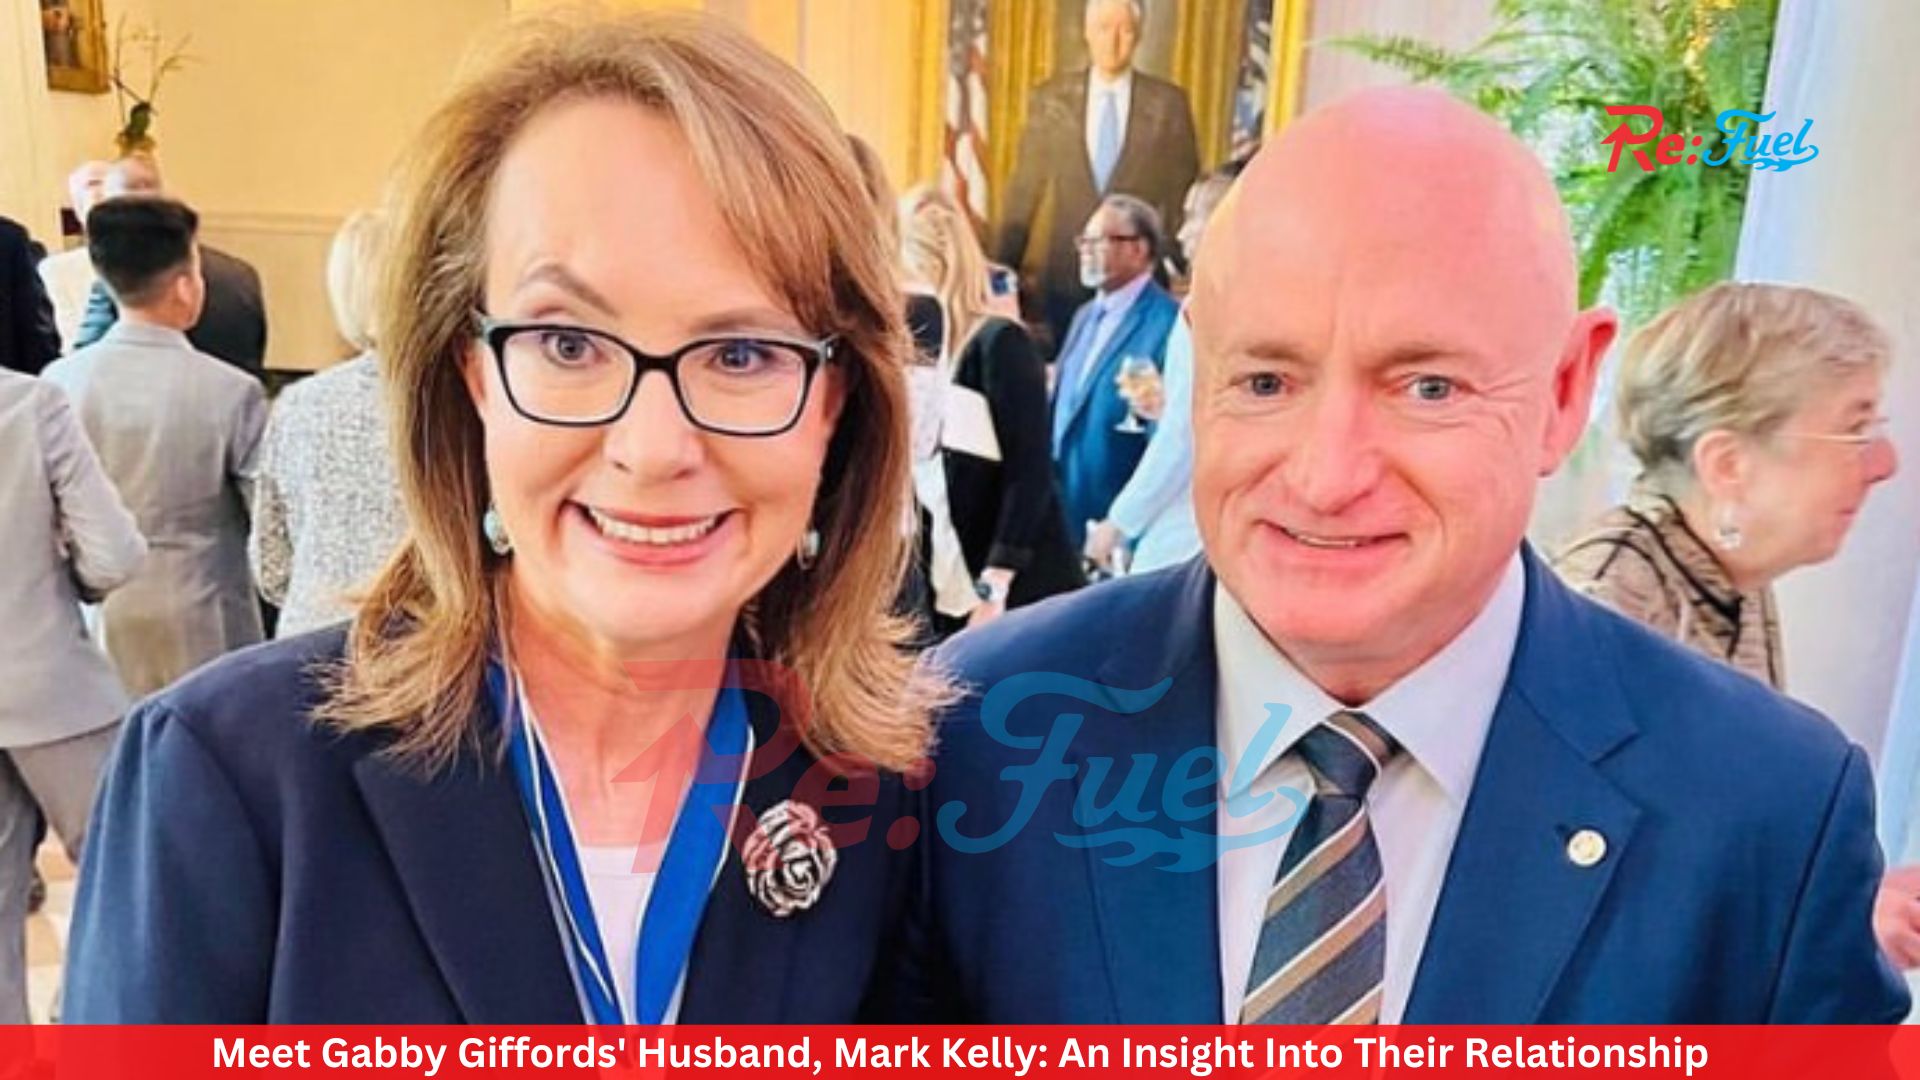 Meet Gabby Giffords' Husband, Mark Kelly: An Insight Into Their Relationship